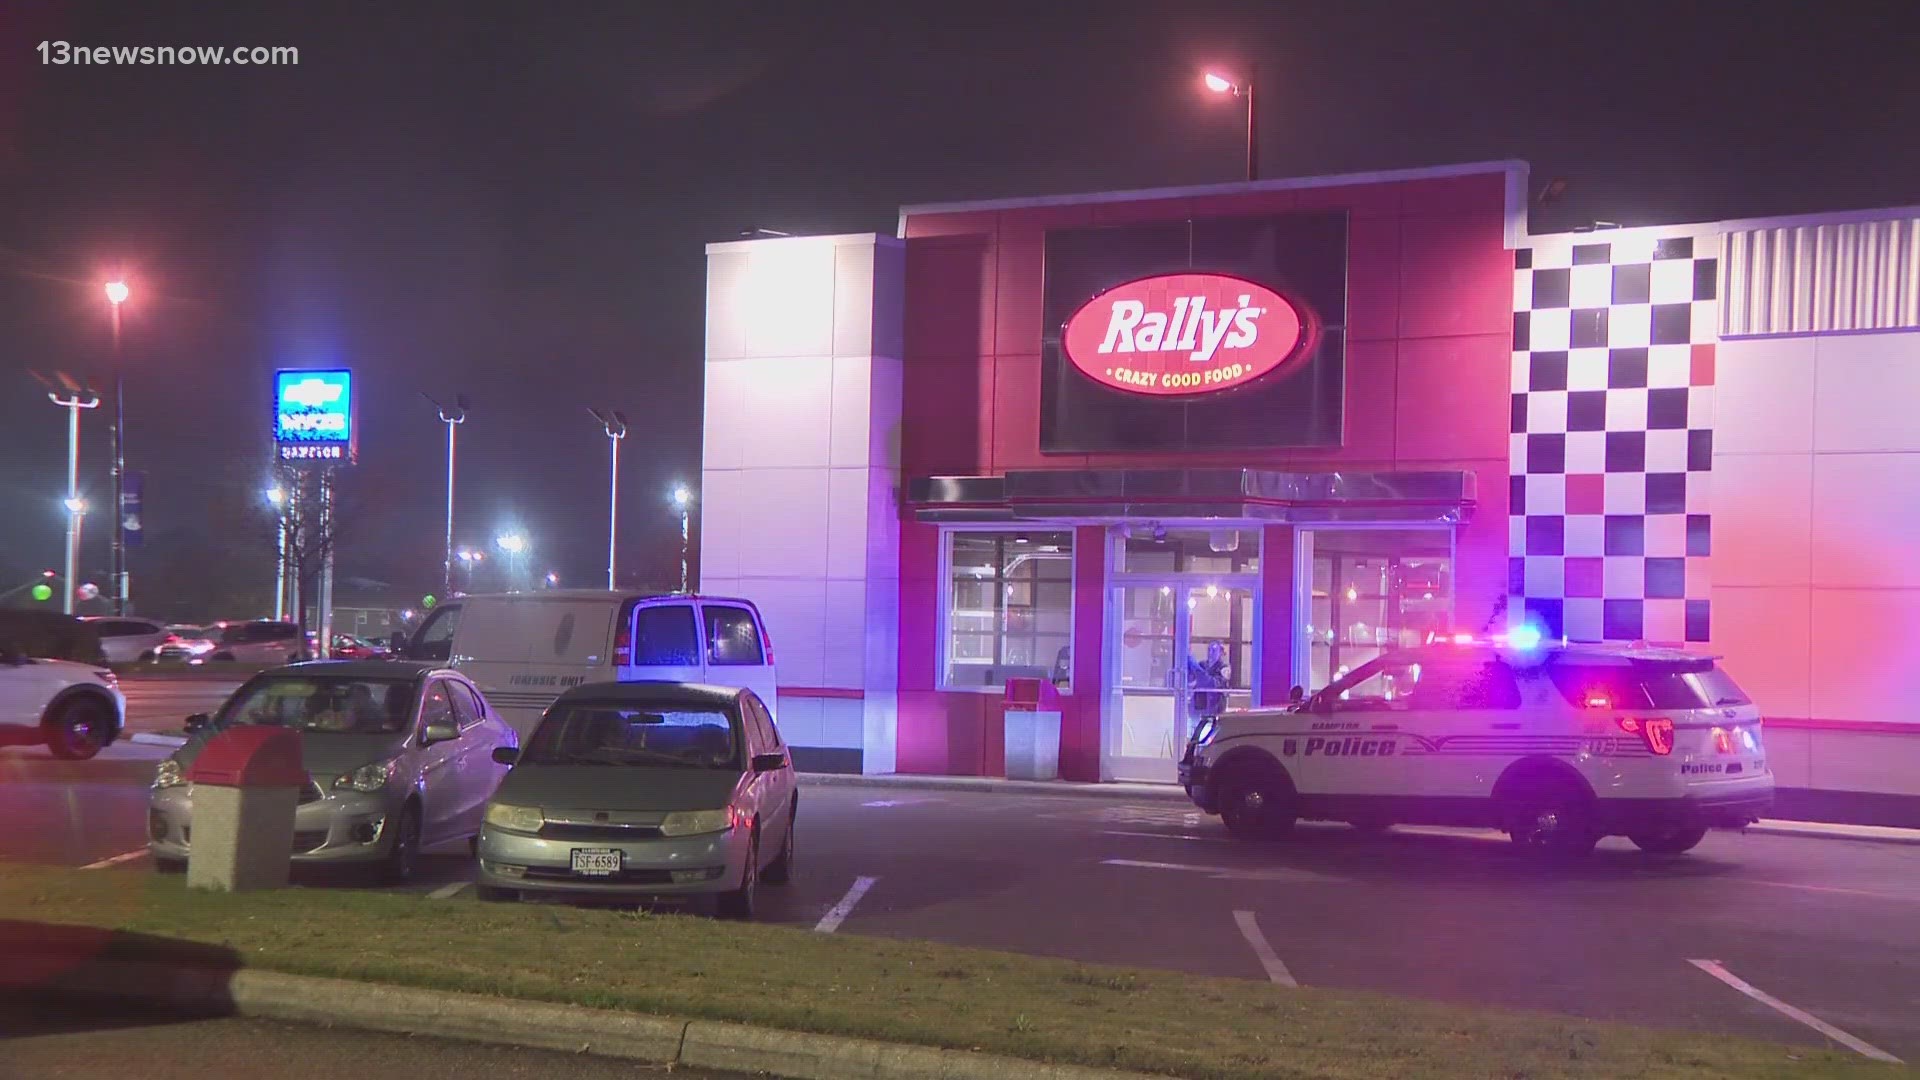 Police said a physical altercation broke out between the employee and an unknown male, who brandished a firearm and shot the teen.